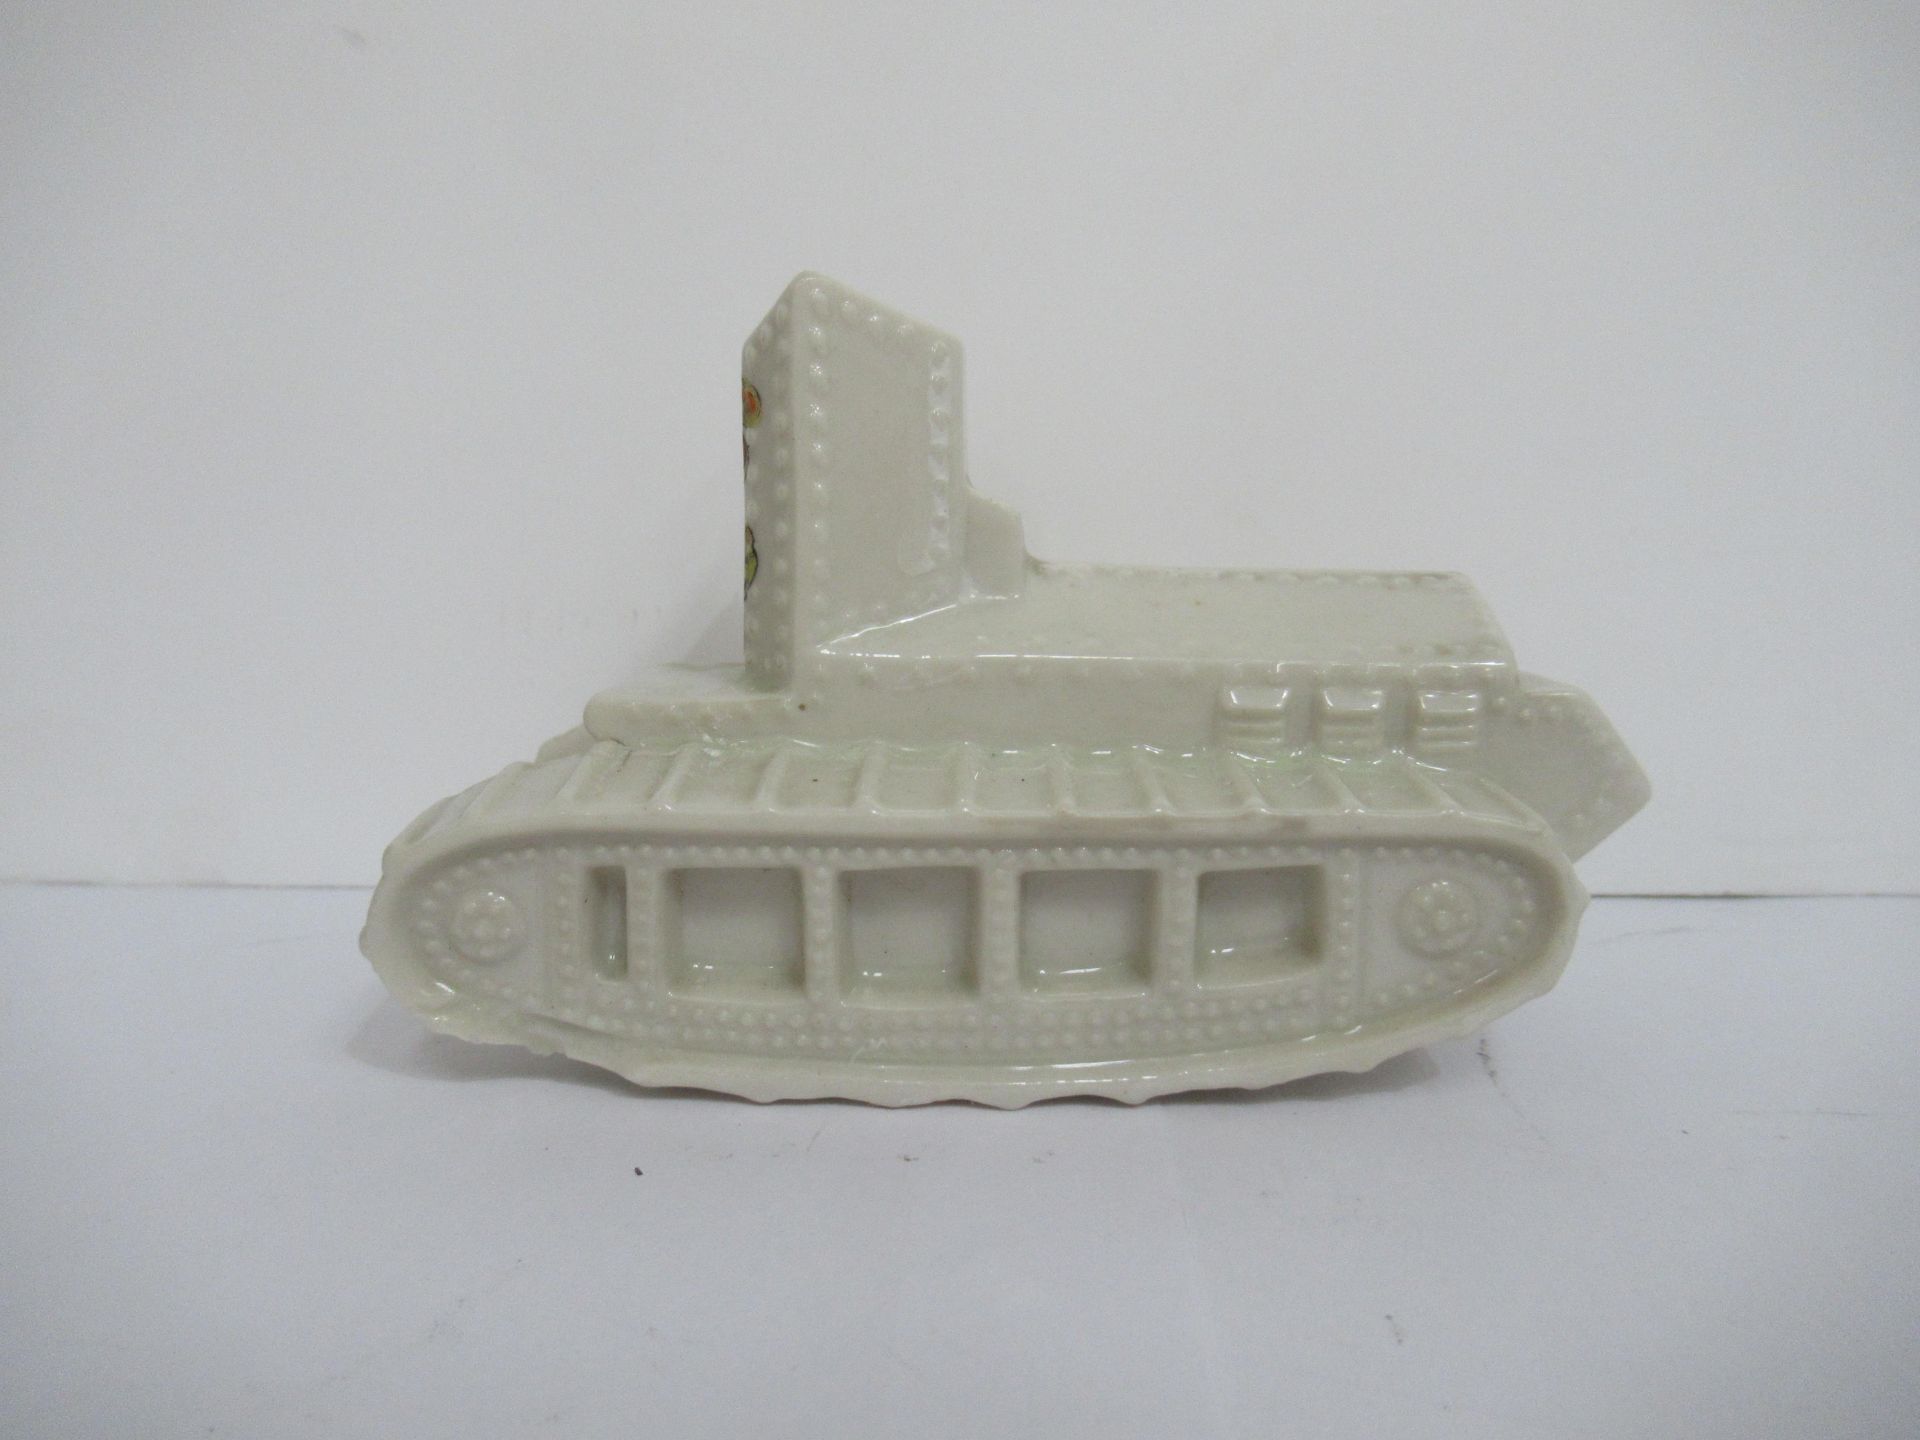 Crested China model of tracked vehicle with Cleethorpes coat of arms (115mm x 60mm) - Bild 3 aus 8